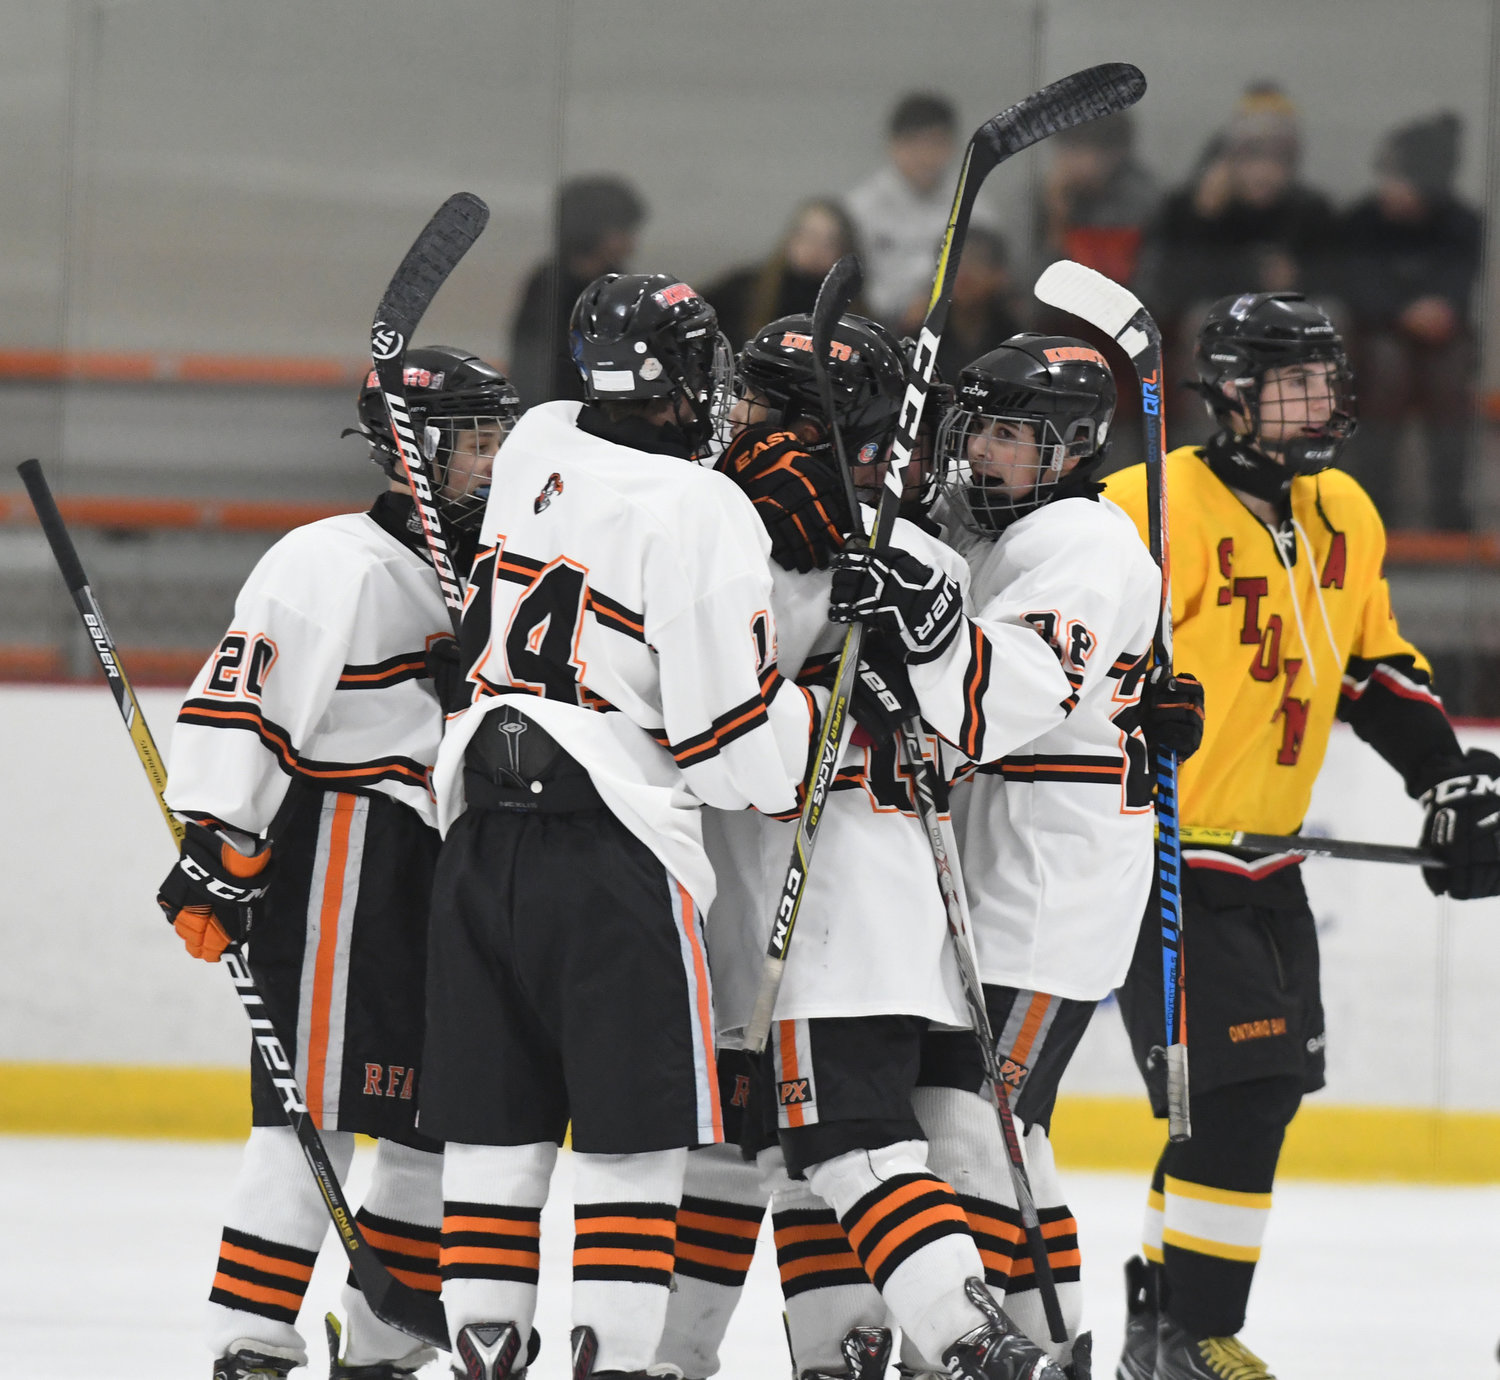 FIRST OF EIGHT — Rome Free Academy players celebrate their first goal of the game against Ontario Bay on Tuesday night at Kennedy Arena. From left are Derek Millington, Tyler Davis, goal scorer Jared Hussey and Sam Wilson. RFA went on to an 8-1 win.